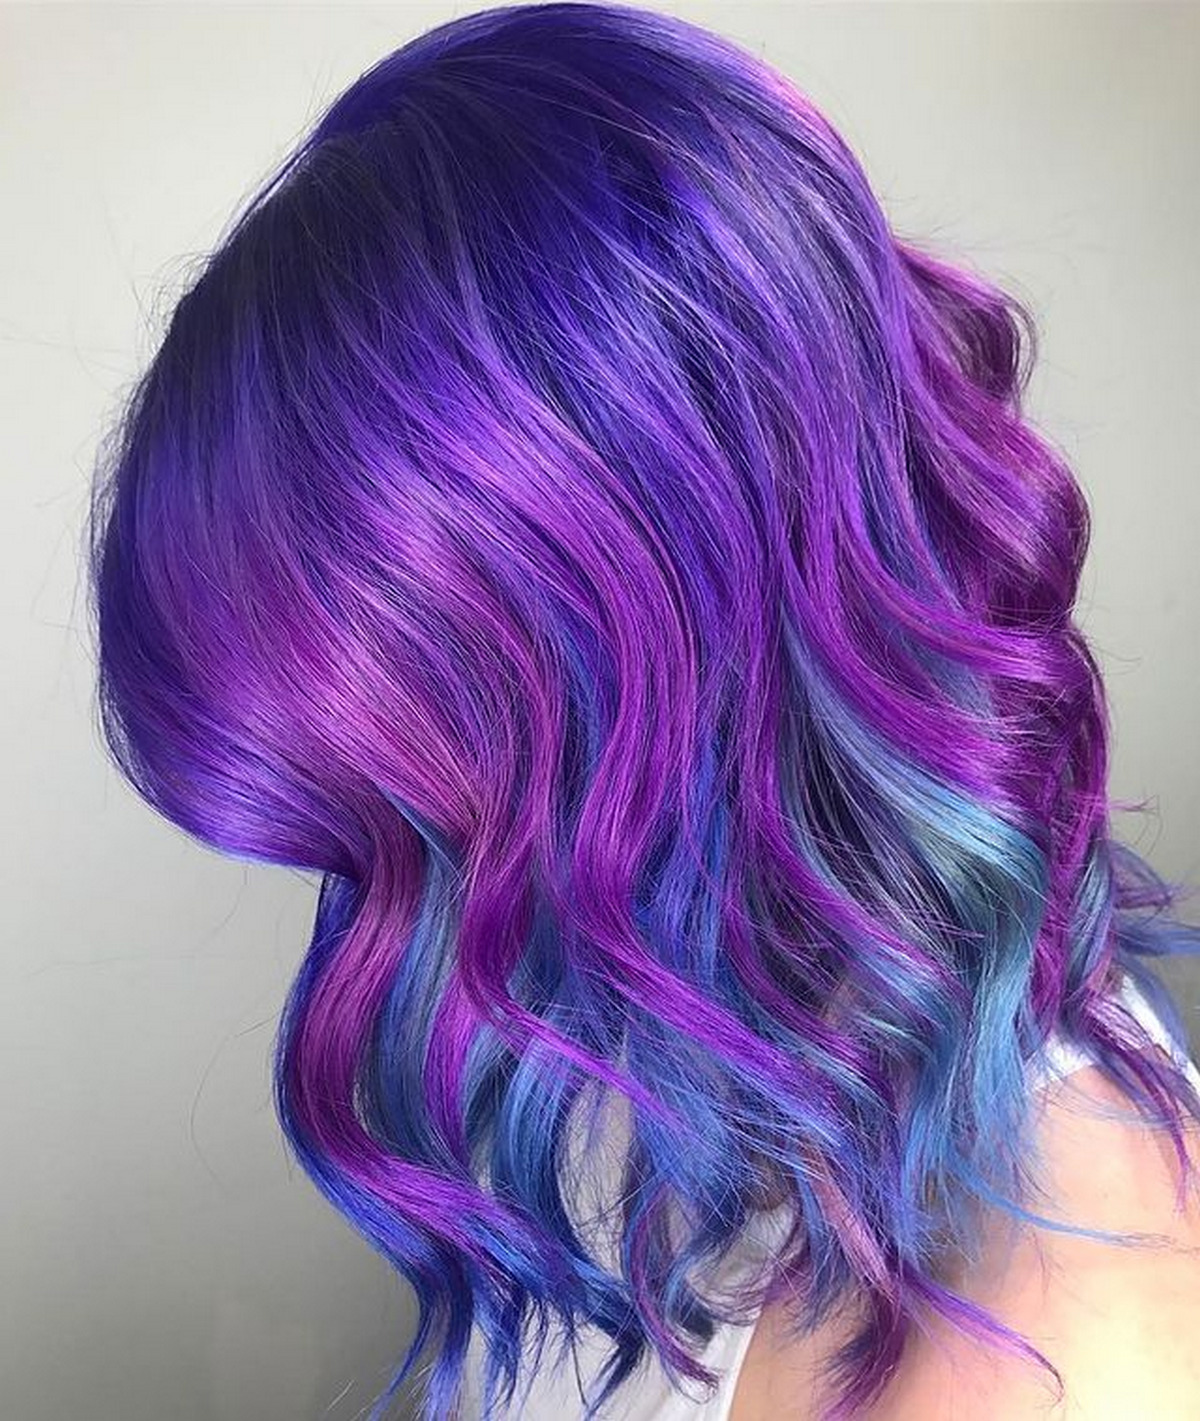  Purple Ombre And Blue For Medium Length Hair With Bright Highlights